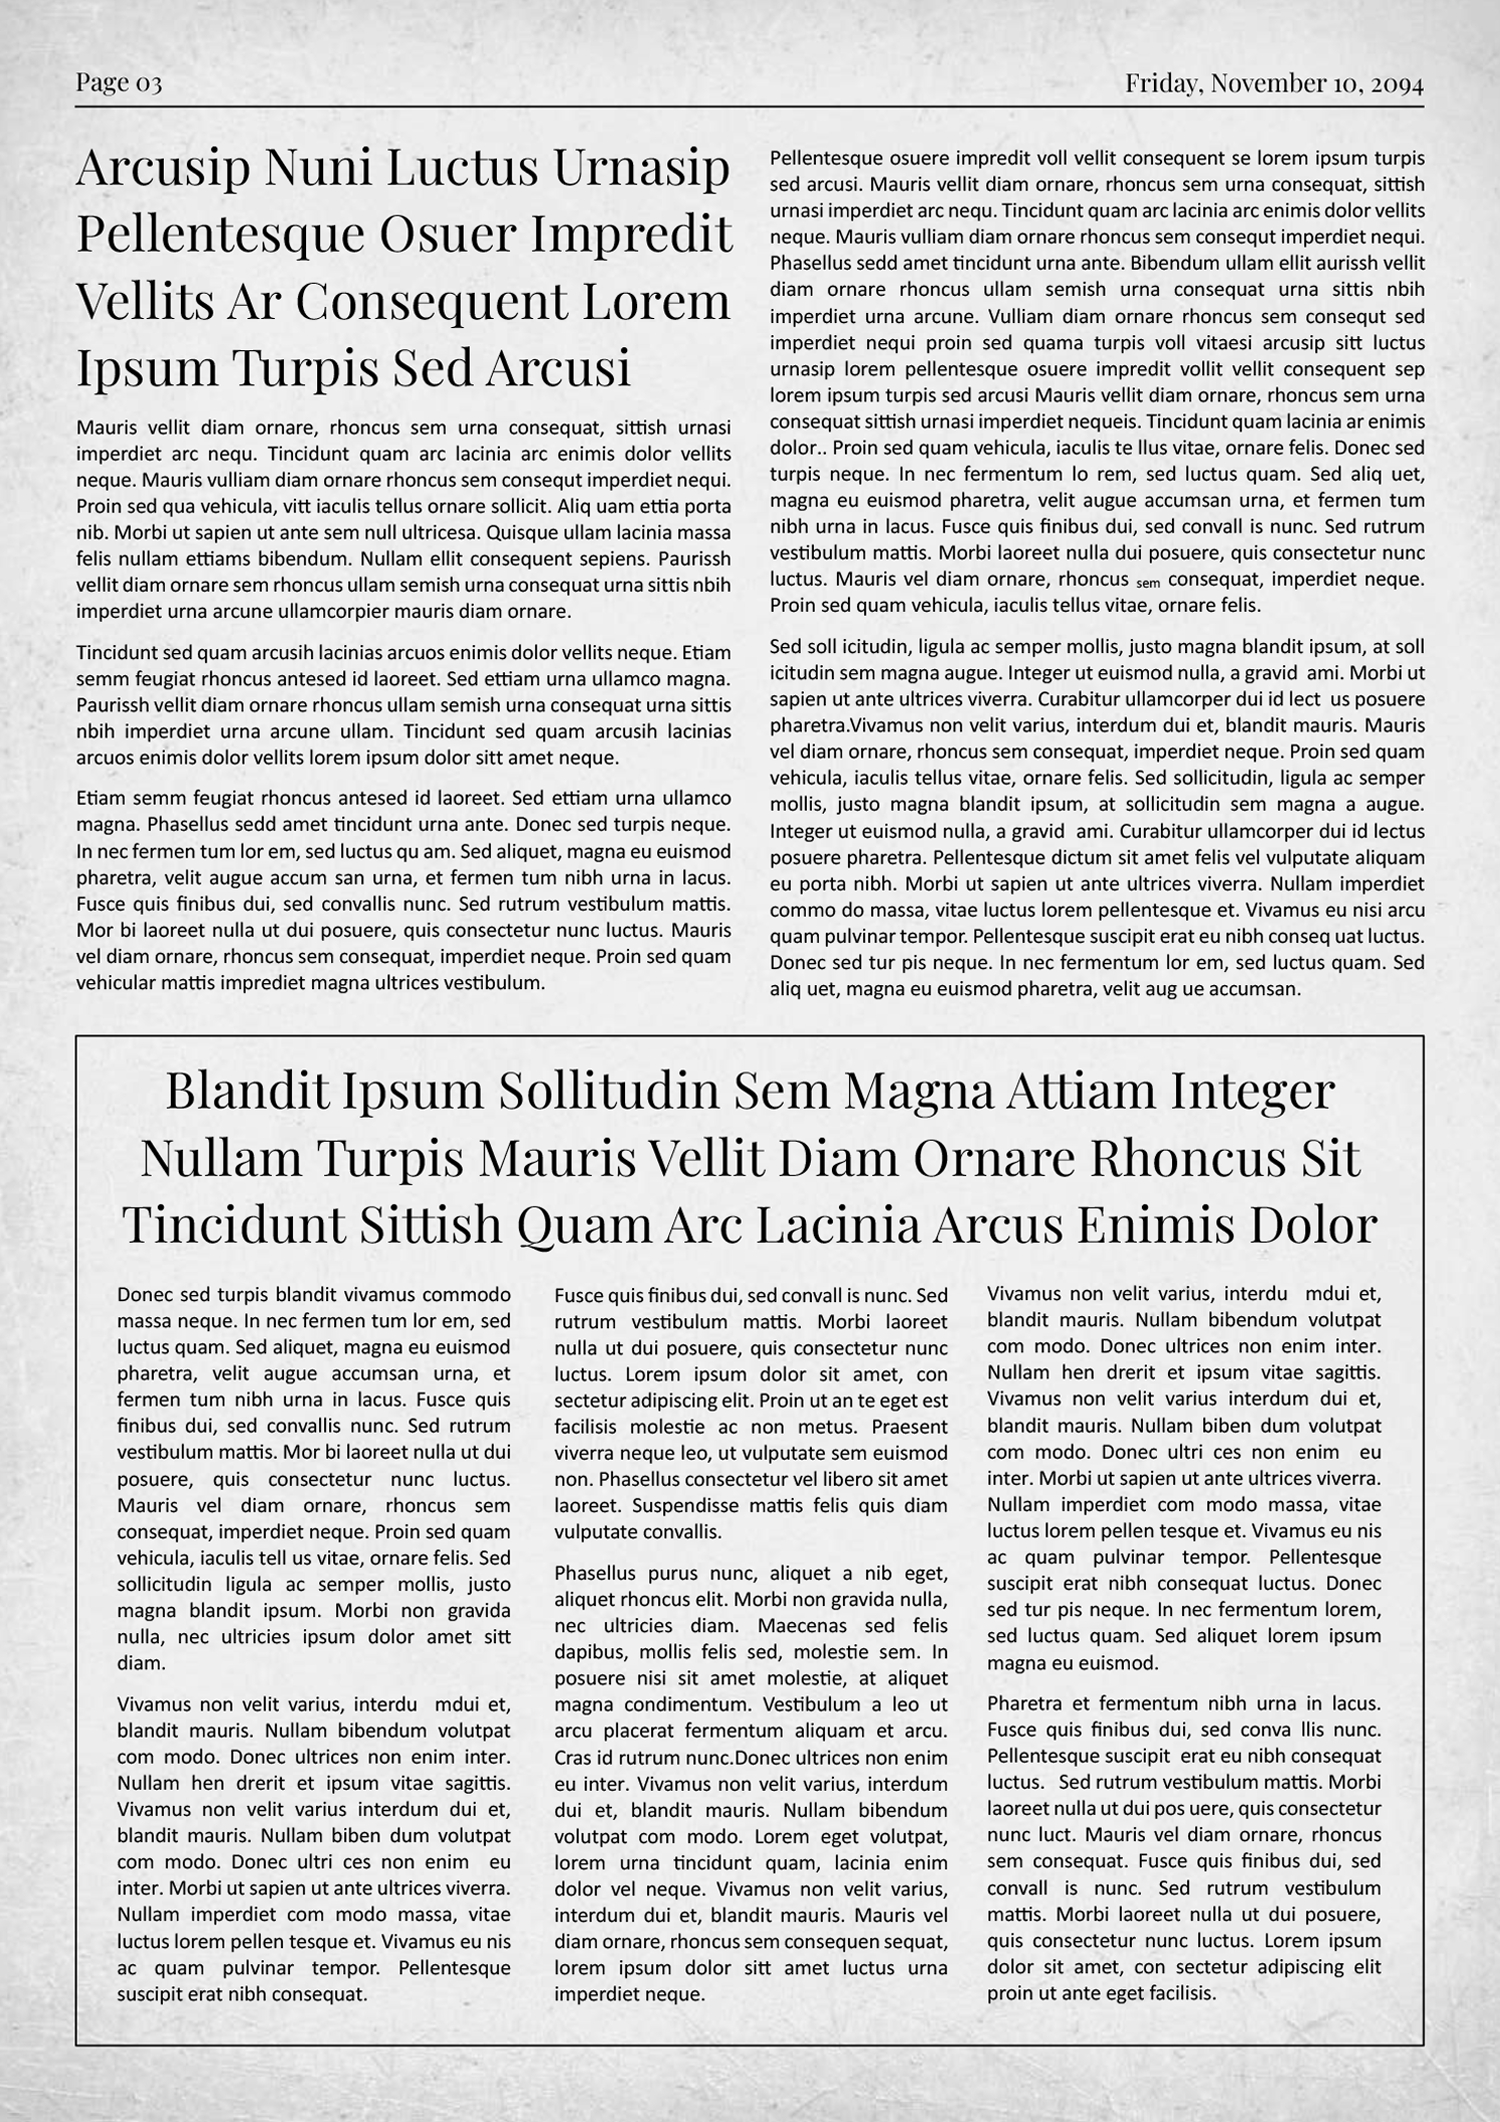 Old Style A3 Newspaper Obituary Template - Page 03